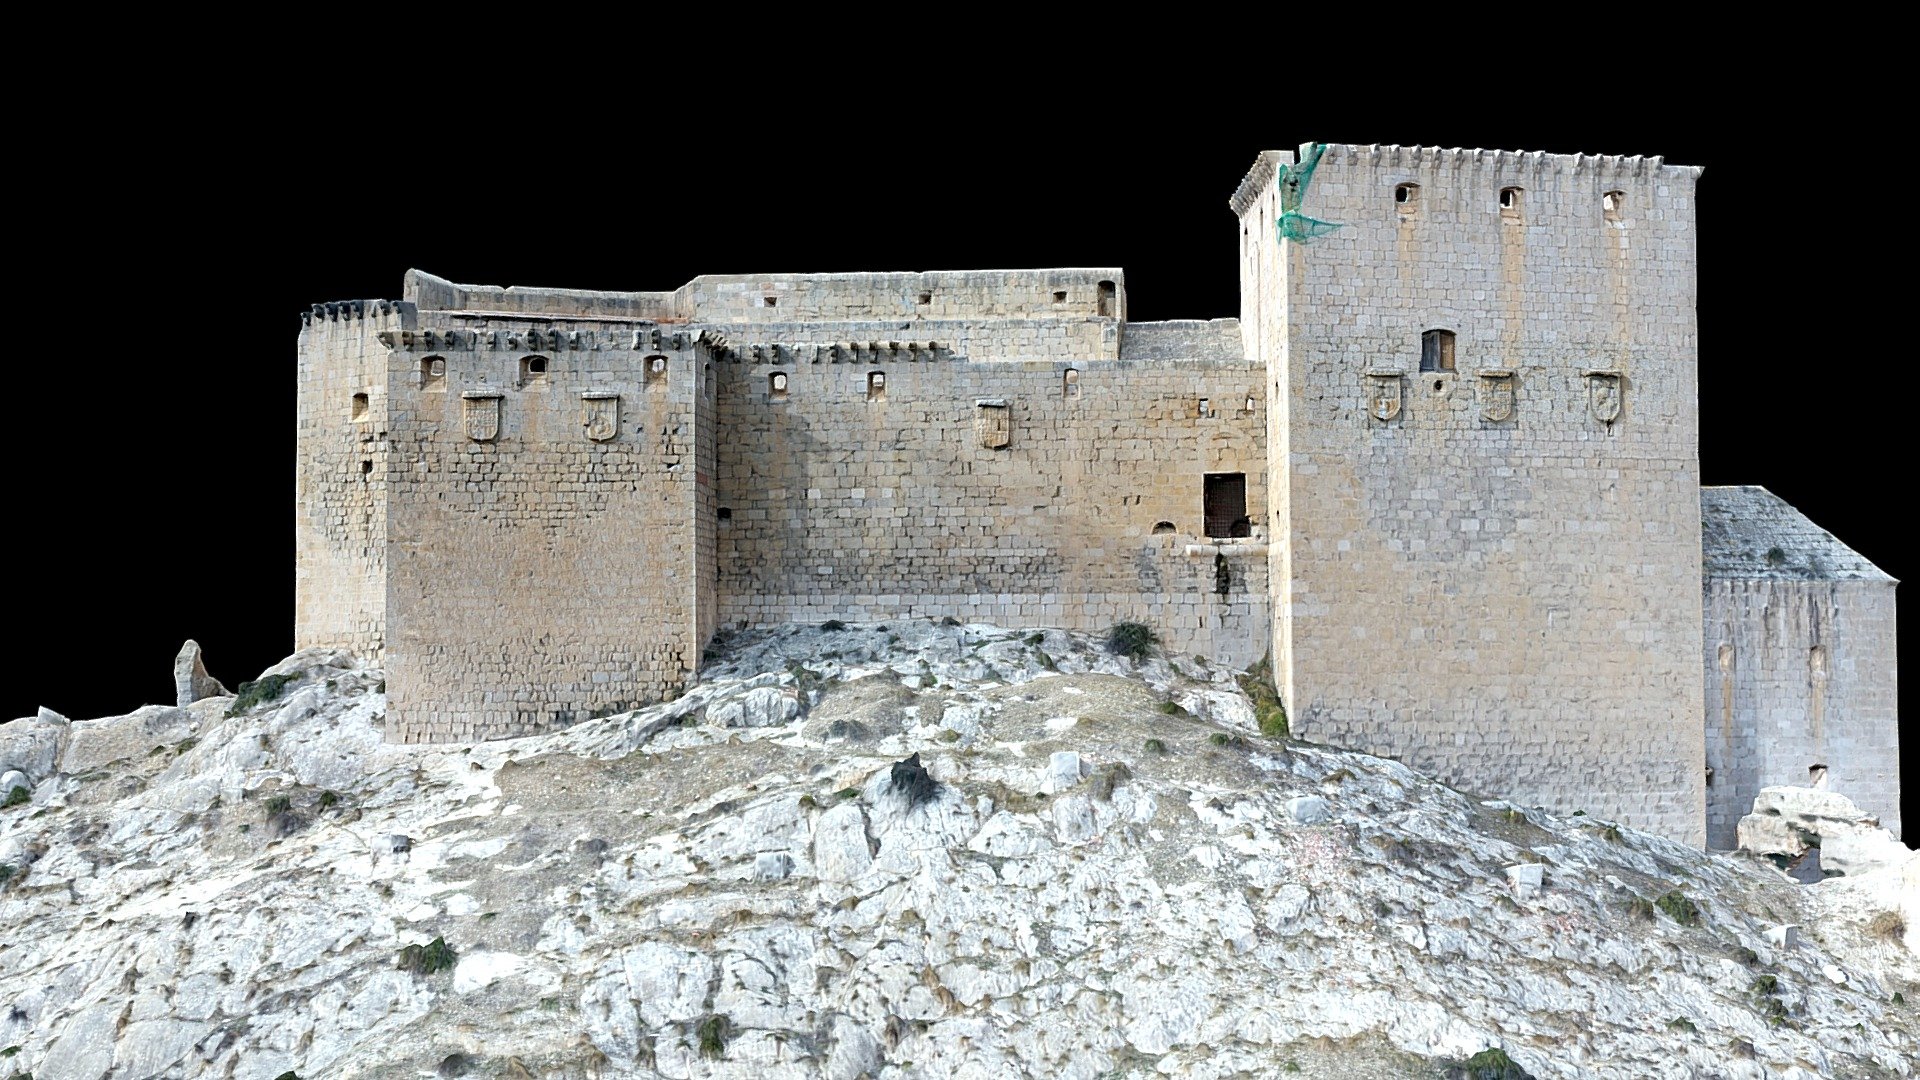 The current Mula castle was built in the 16th century on the remains of the old medieval Islamic castle. Still today a great part of the wall that protected this site in Muslim time is preserved thanks to it being reused after the Christian conquest. However, the current castle is the work of Pedro Fajardo y Chacón, I Marqués de los Vélez, who after the popular revolts of 1520 against him, decided to show his power to the town of Mula through the construction of this fortress. That explains the existence in the walls of the castle of up to nine coats of arms belonging to the Fajardo and Silva family.

This model was processed in RealityCapture from 1653 images from a DJI Phantom 4 Pro 3d model